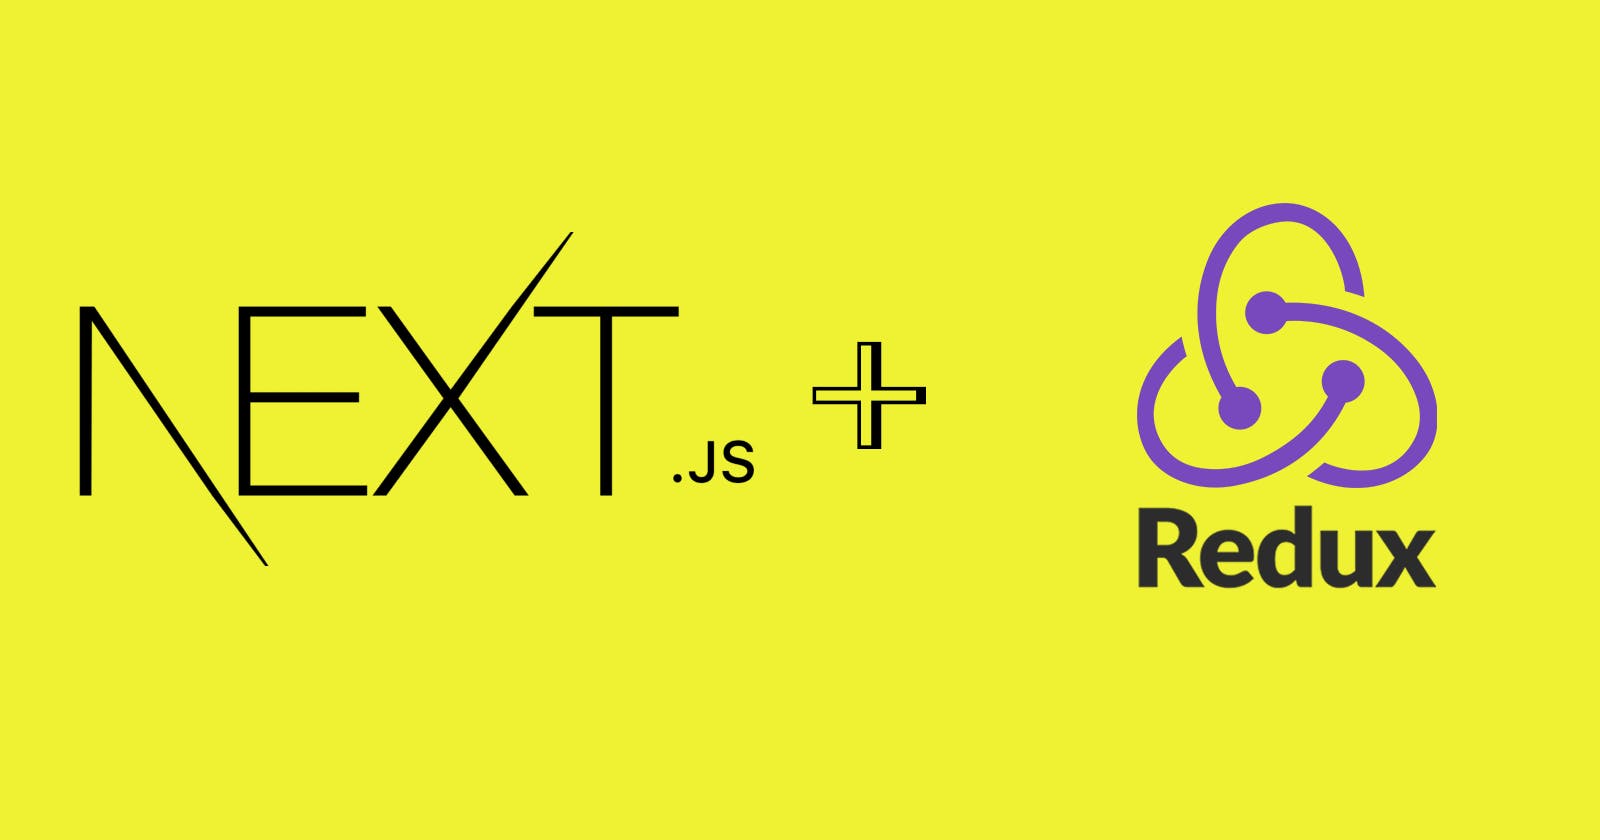 How to use Next js with Redux ToolKit